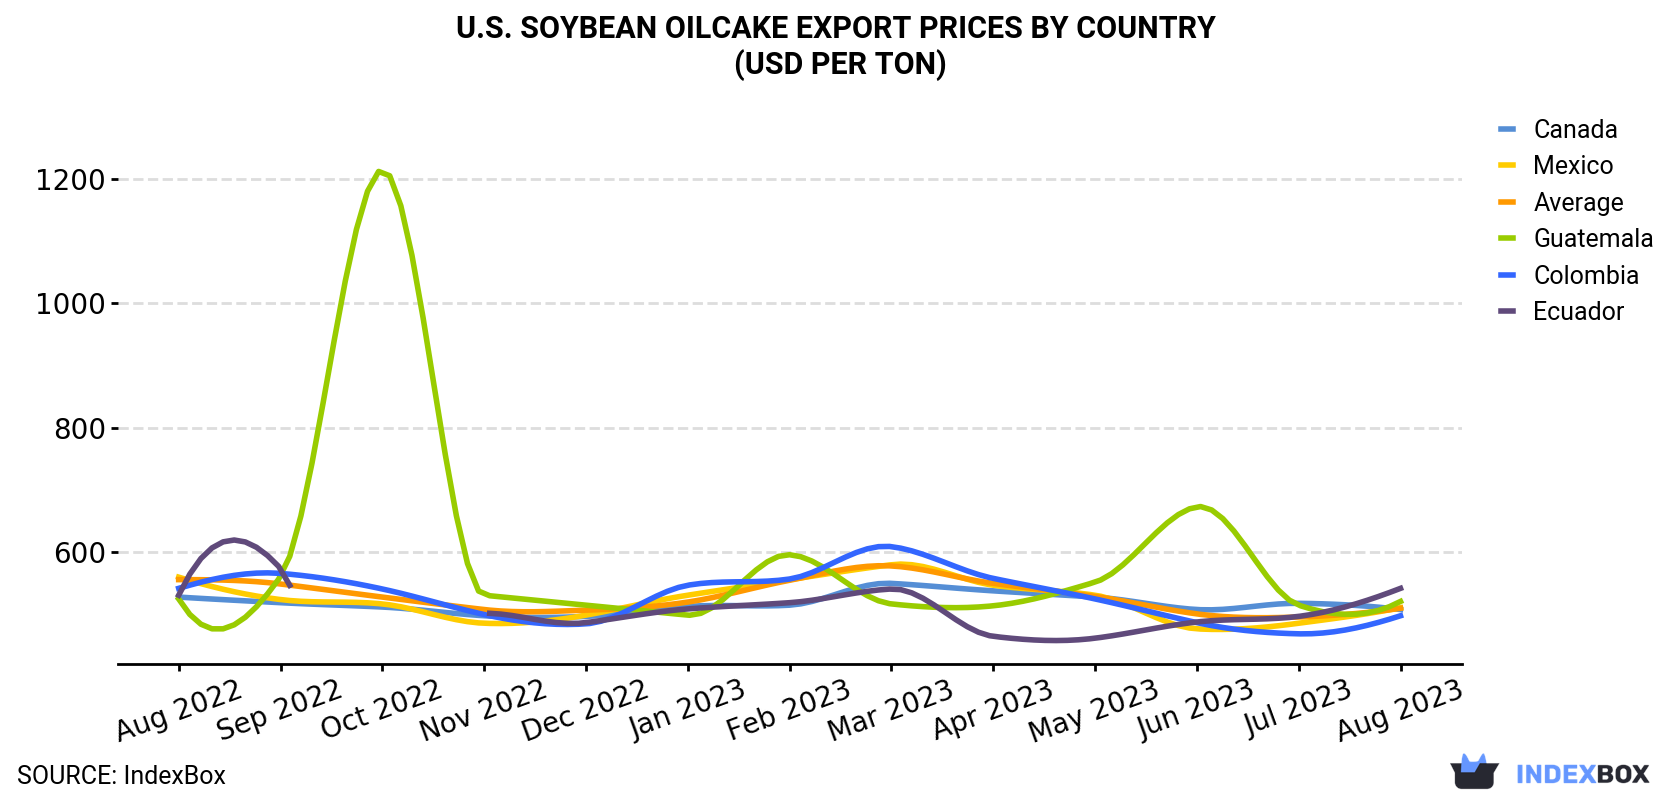 U.S. Soybean Oilcake Export Prices By Country (USD Per Ton)